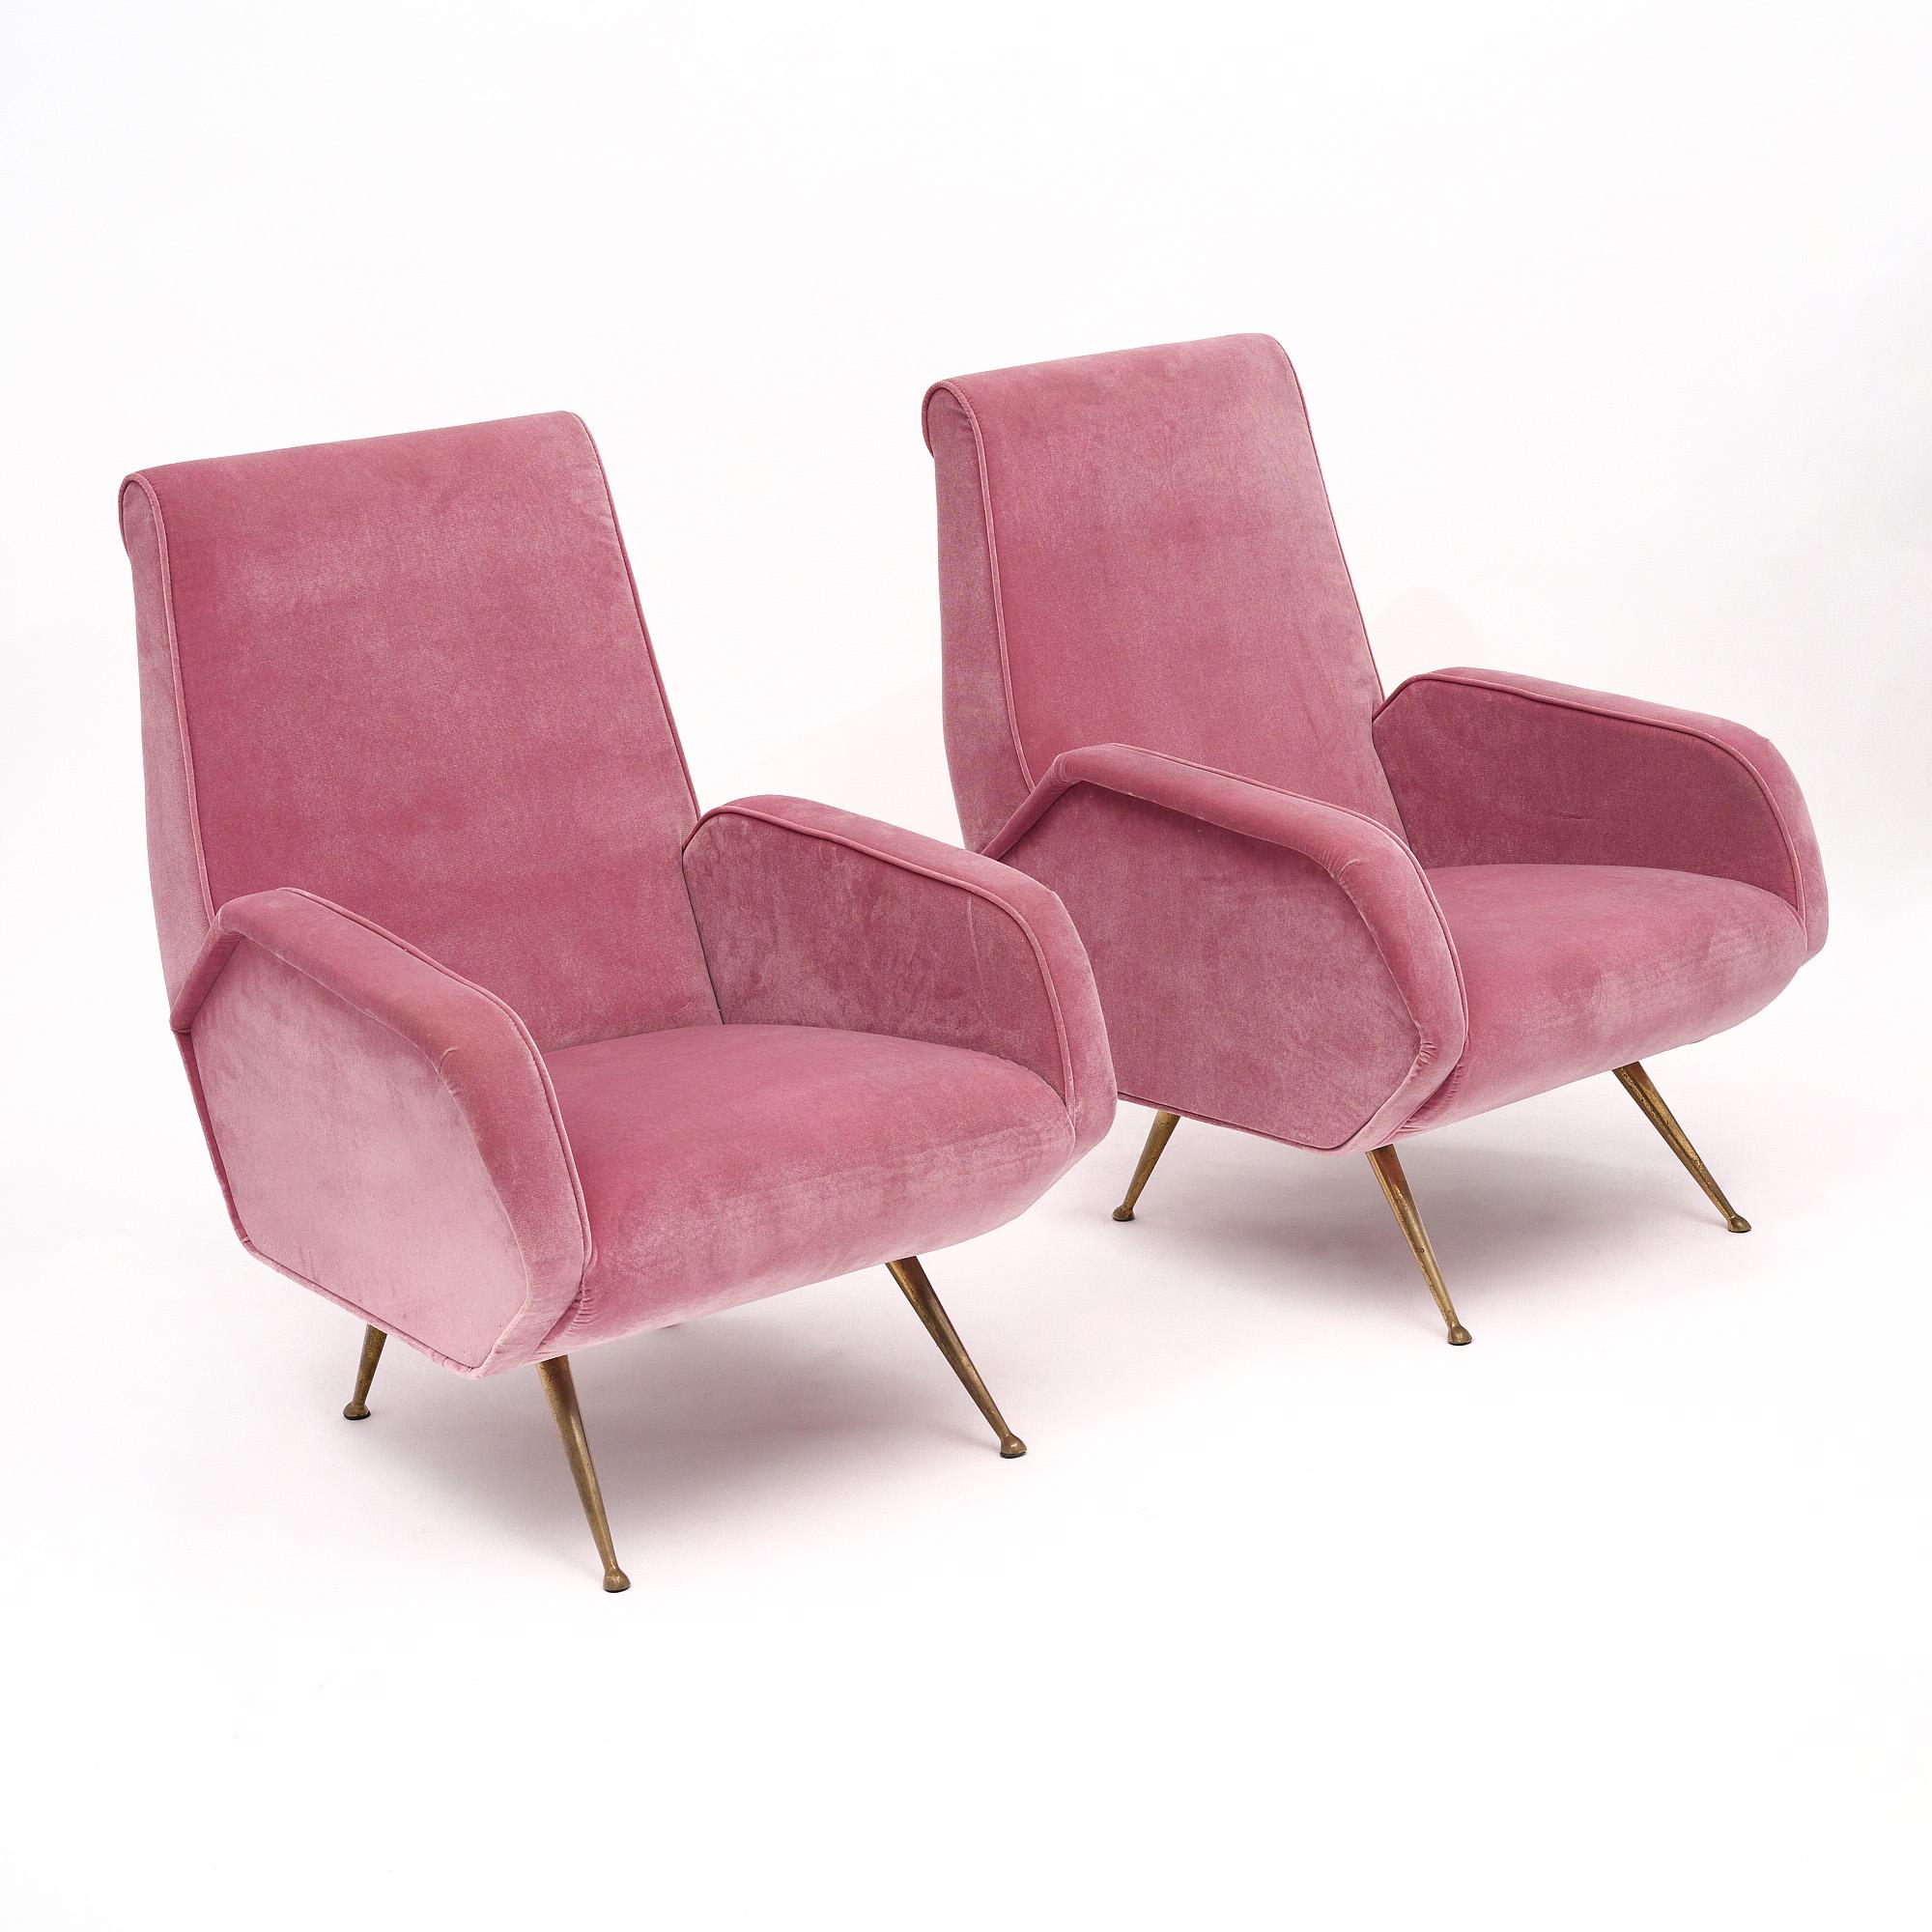 Pair of Italian vintage armchairs in the mid-century style that have been newly upholstered in a micro fiber velvet in a bright, warm pink tone. We love the iconic Italian brass legs that taper out for a subtle yet striking effect.
